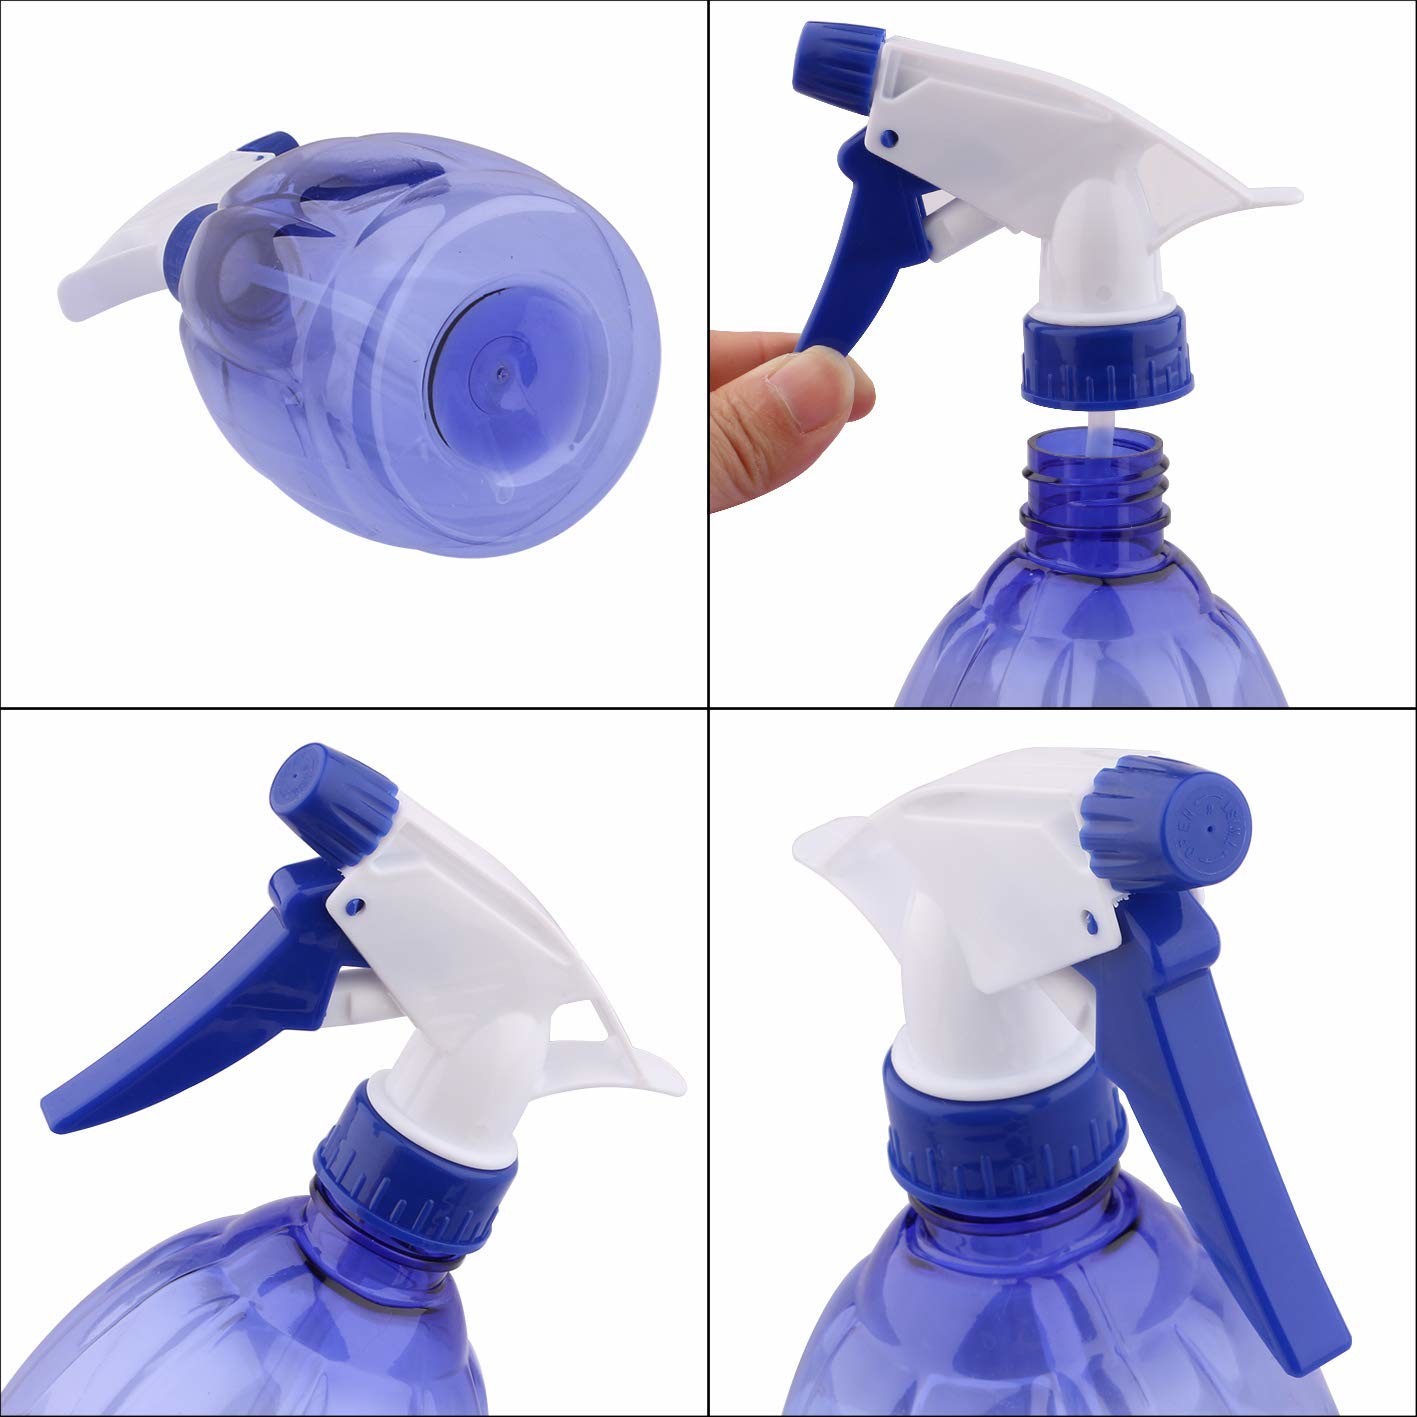 Purple Cosmetic Spray Bottles Daily Life Kitchen Cleaning Spray Bottles